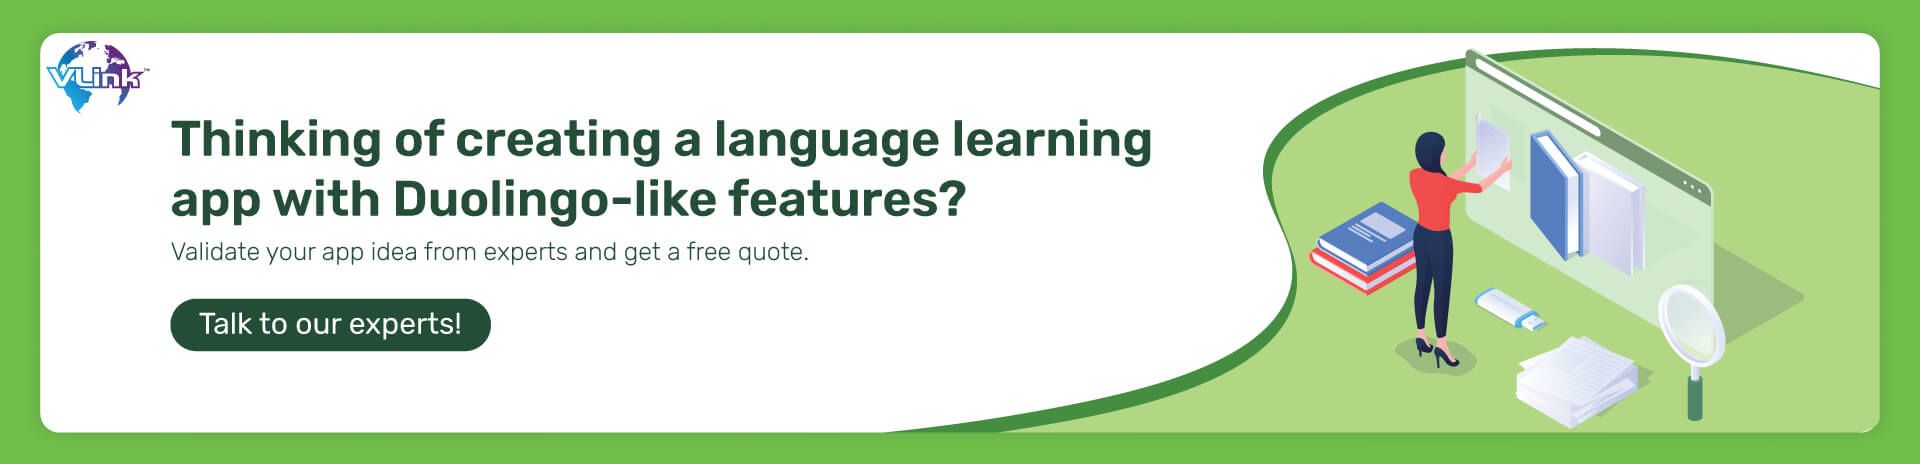 Thinking Of creating a language learing app 